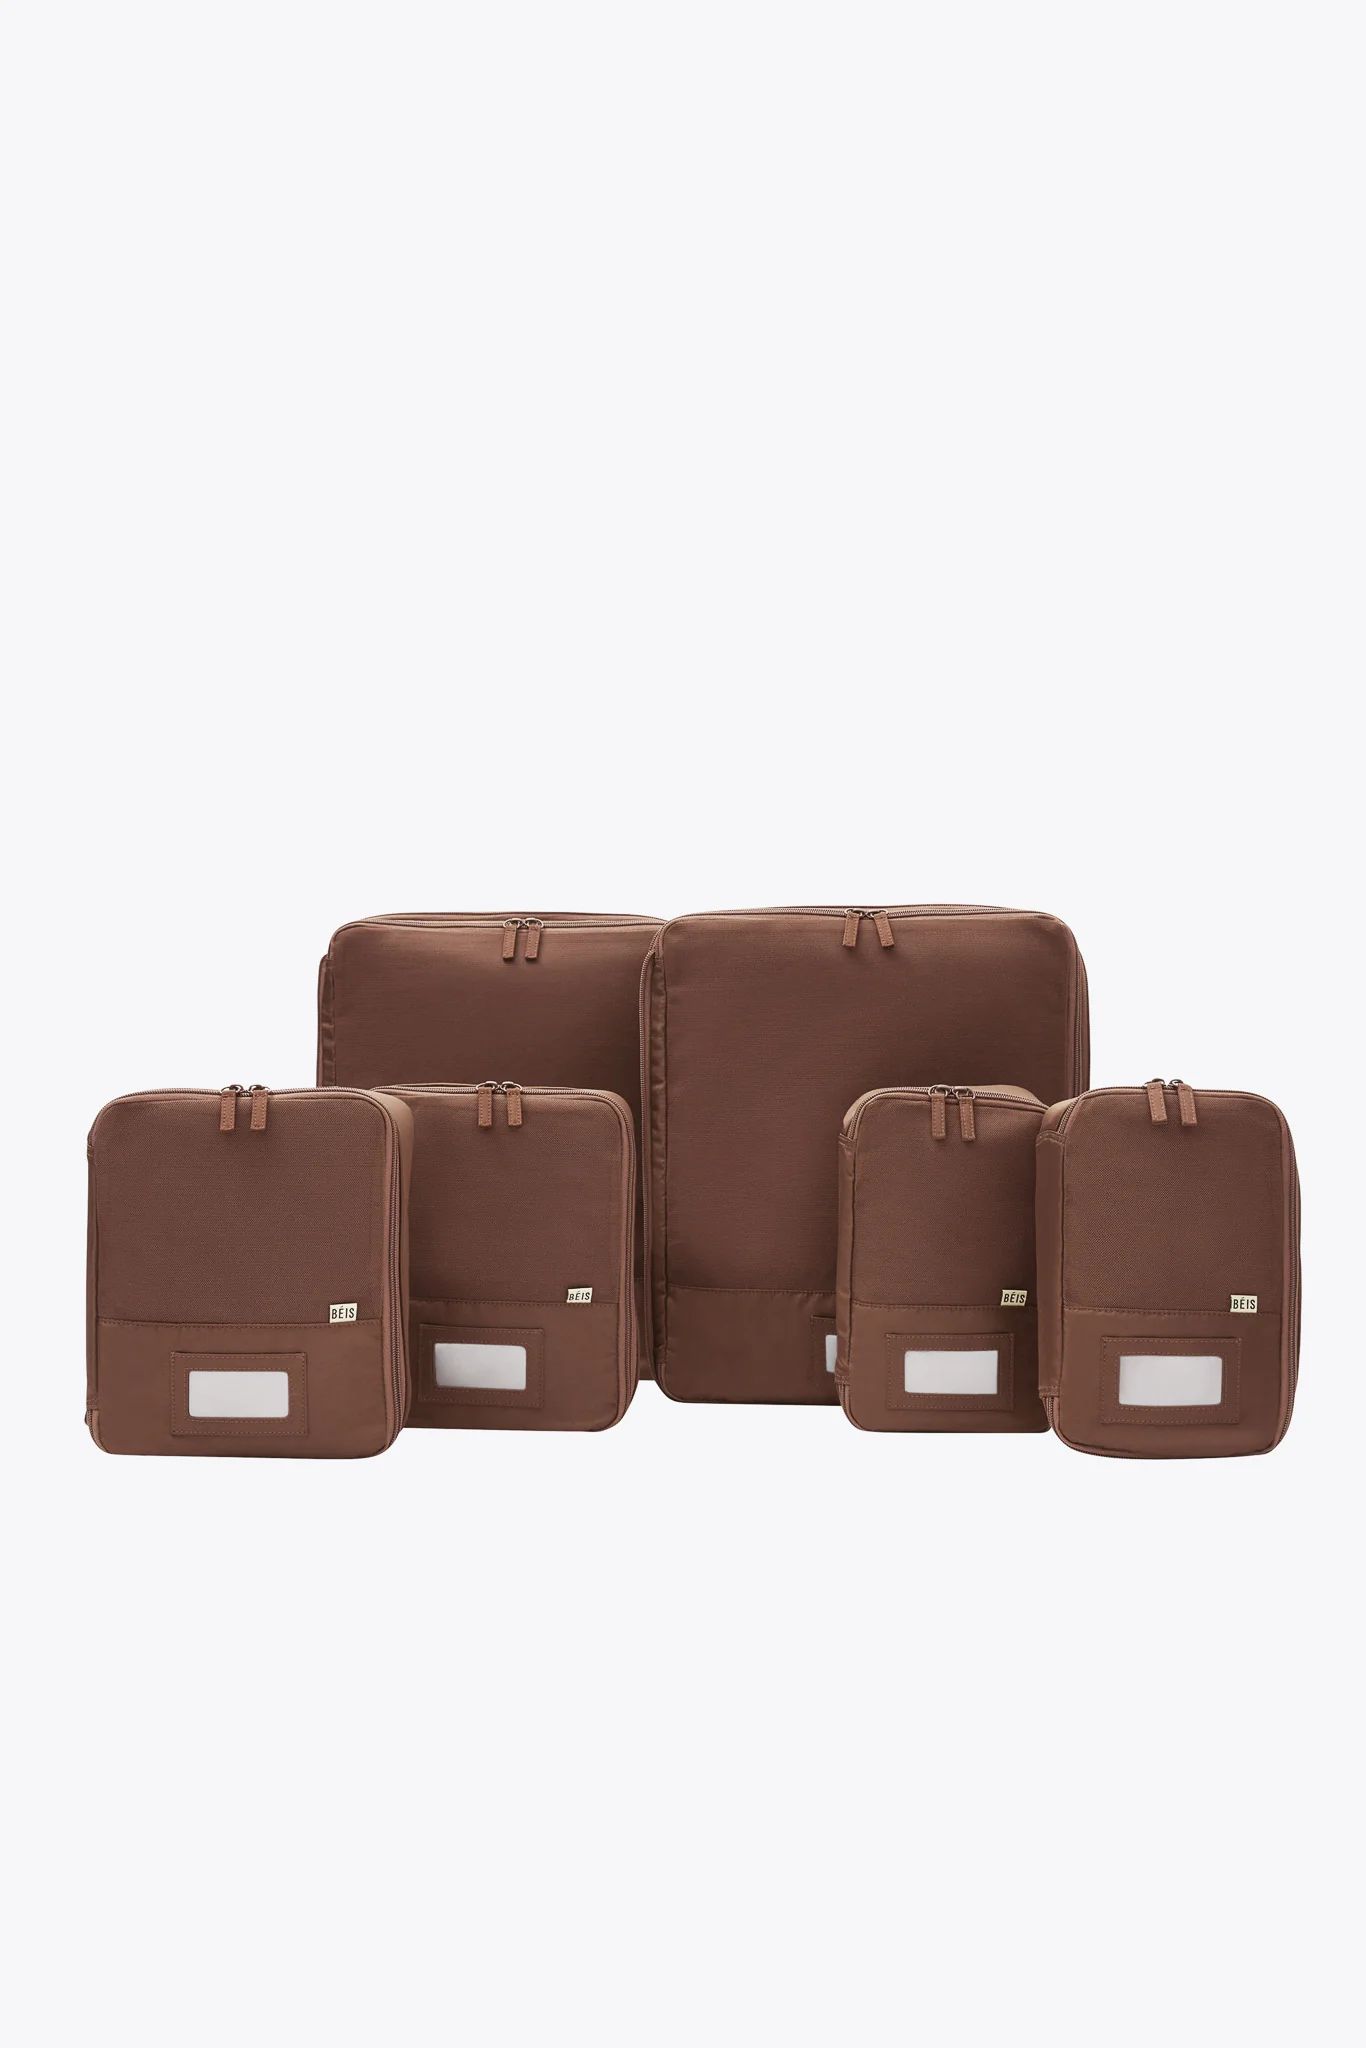 The Compression Packing Cubes 6 pc in Maple | BÉIS Travel